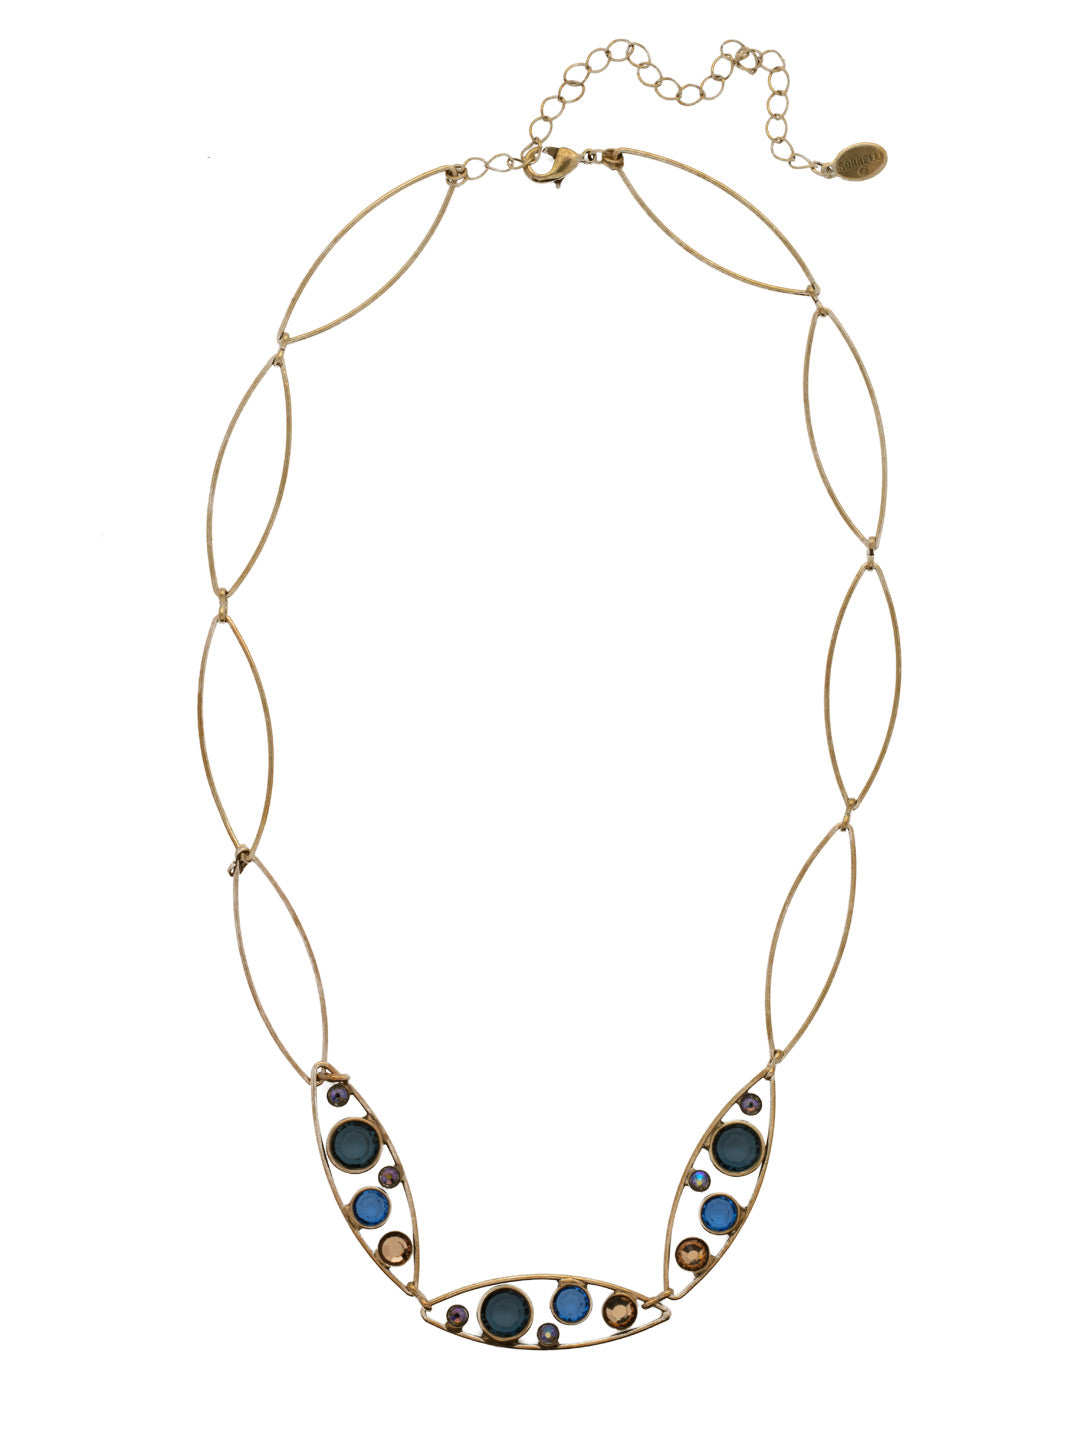 Charlene Triple Tennis Necklace - NFC52AGVBN - <p>The Charlene Triple Tennis Necklace combines oblong metal hoops and delicate crystal channels to create a gorgeous twist on the classic tennis necklace. From Sorrelli's Venice Blue collection in our Antique Gold-tone finish.</p>